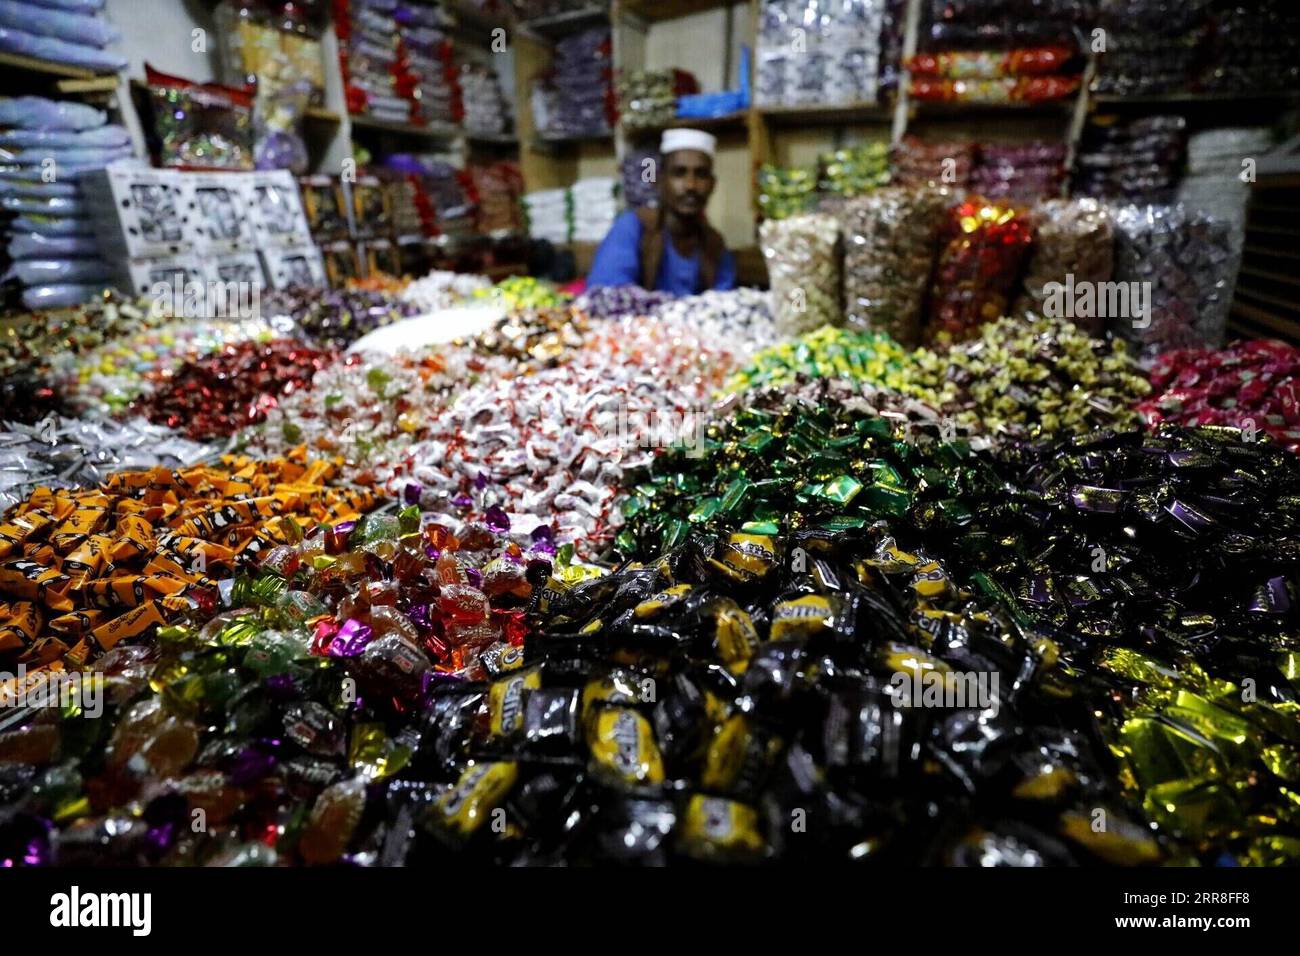 210506 -- KHARTOUM, May 6, 2021 -- A vendor sells sweets at a market in Khartoum, Sudan, May 5, 2021. Eid Al-Fitr, also called the festival of breaking the fast that marks the end of the month-long dawn-to-sunset fasting of Ramadan, is celebrated by Muslims worldwide.  SUDAN-KHARTOUM-EID AL-FITR-SHOPPING MohamedxKhidir PUBLICATIONxNOTxINxCHN Stock Photo